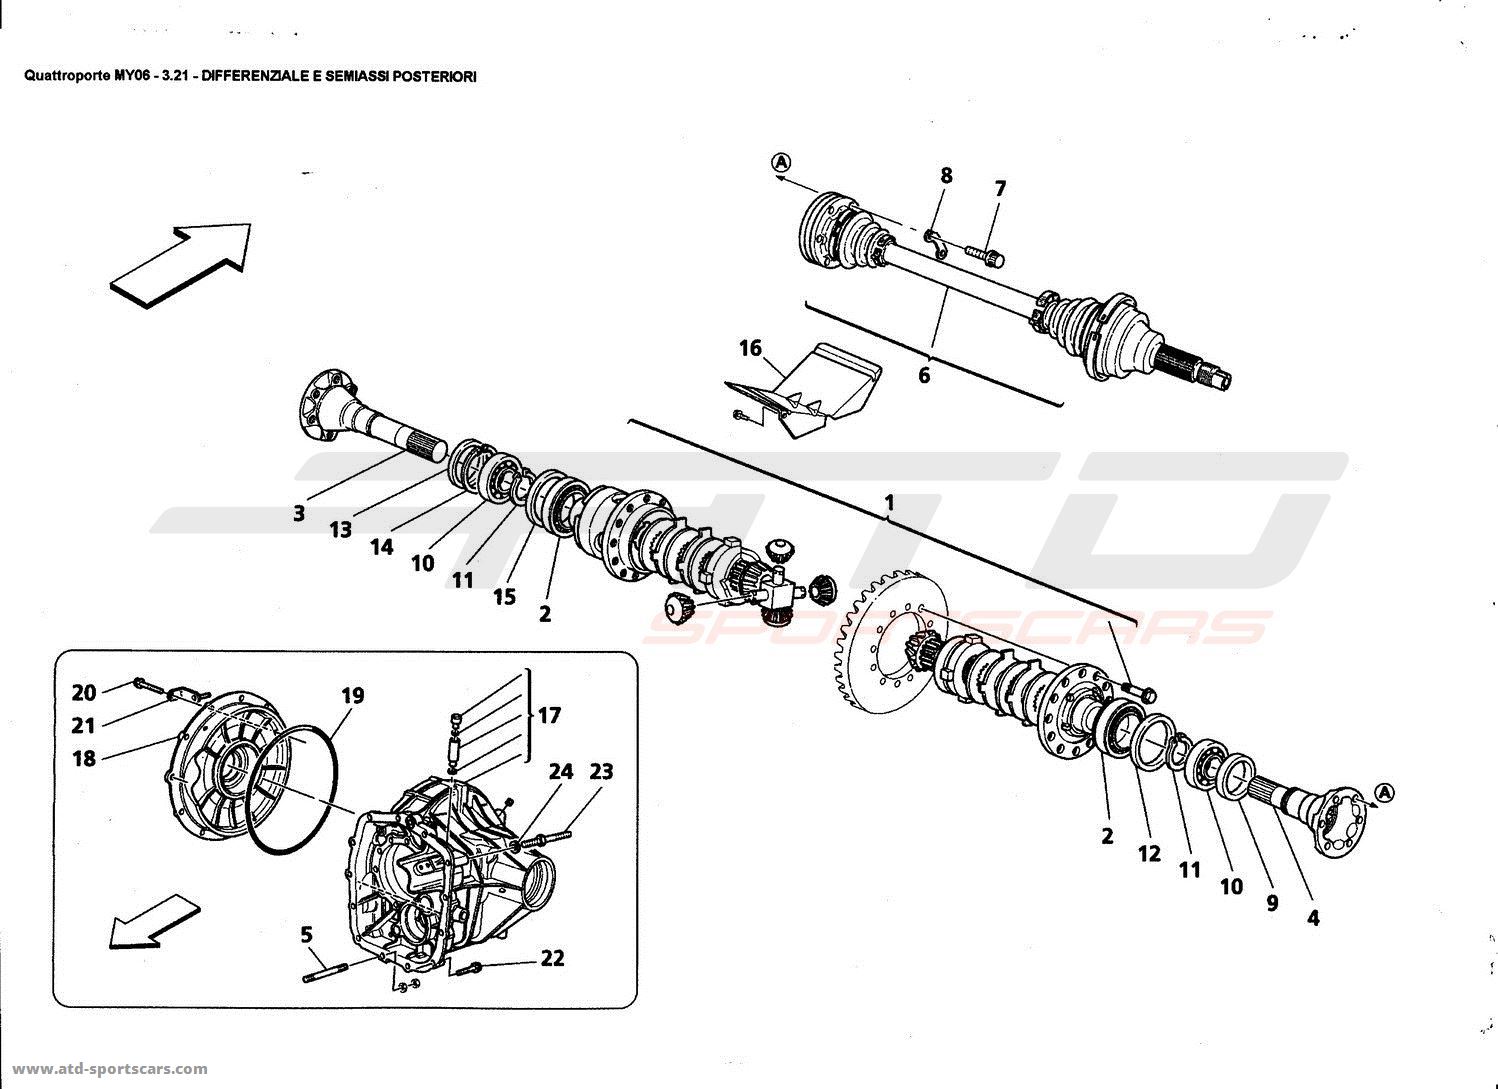 REAR OIFFERENTIAL ANO AXLE SHAFTS